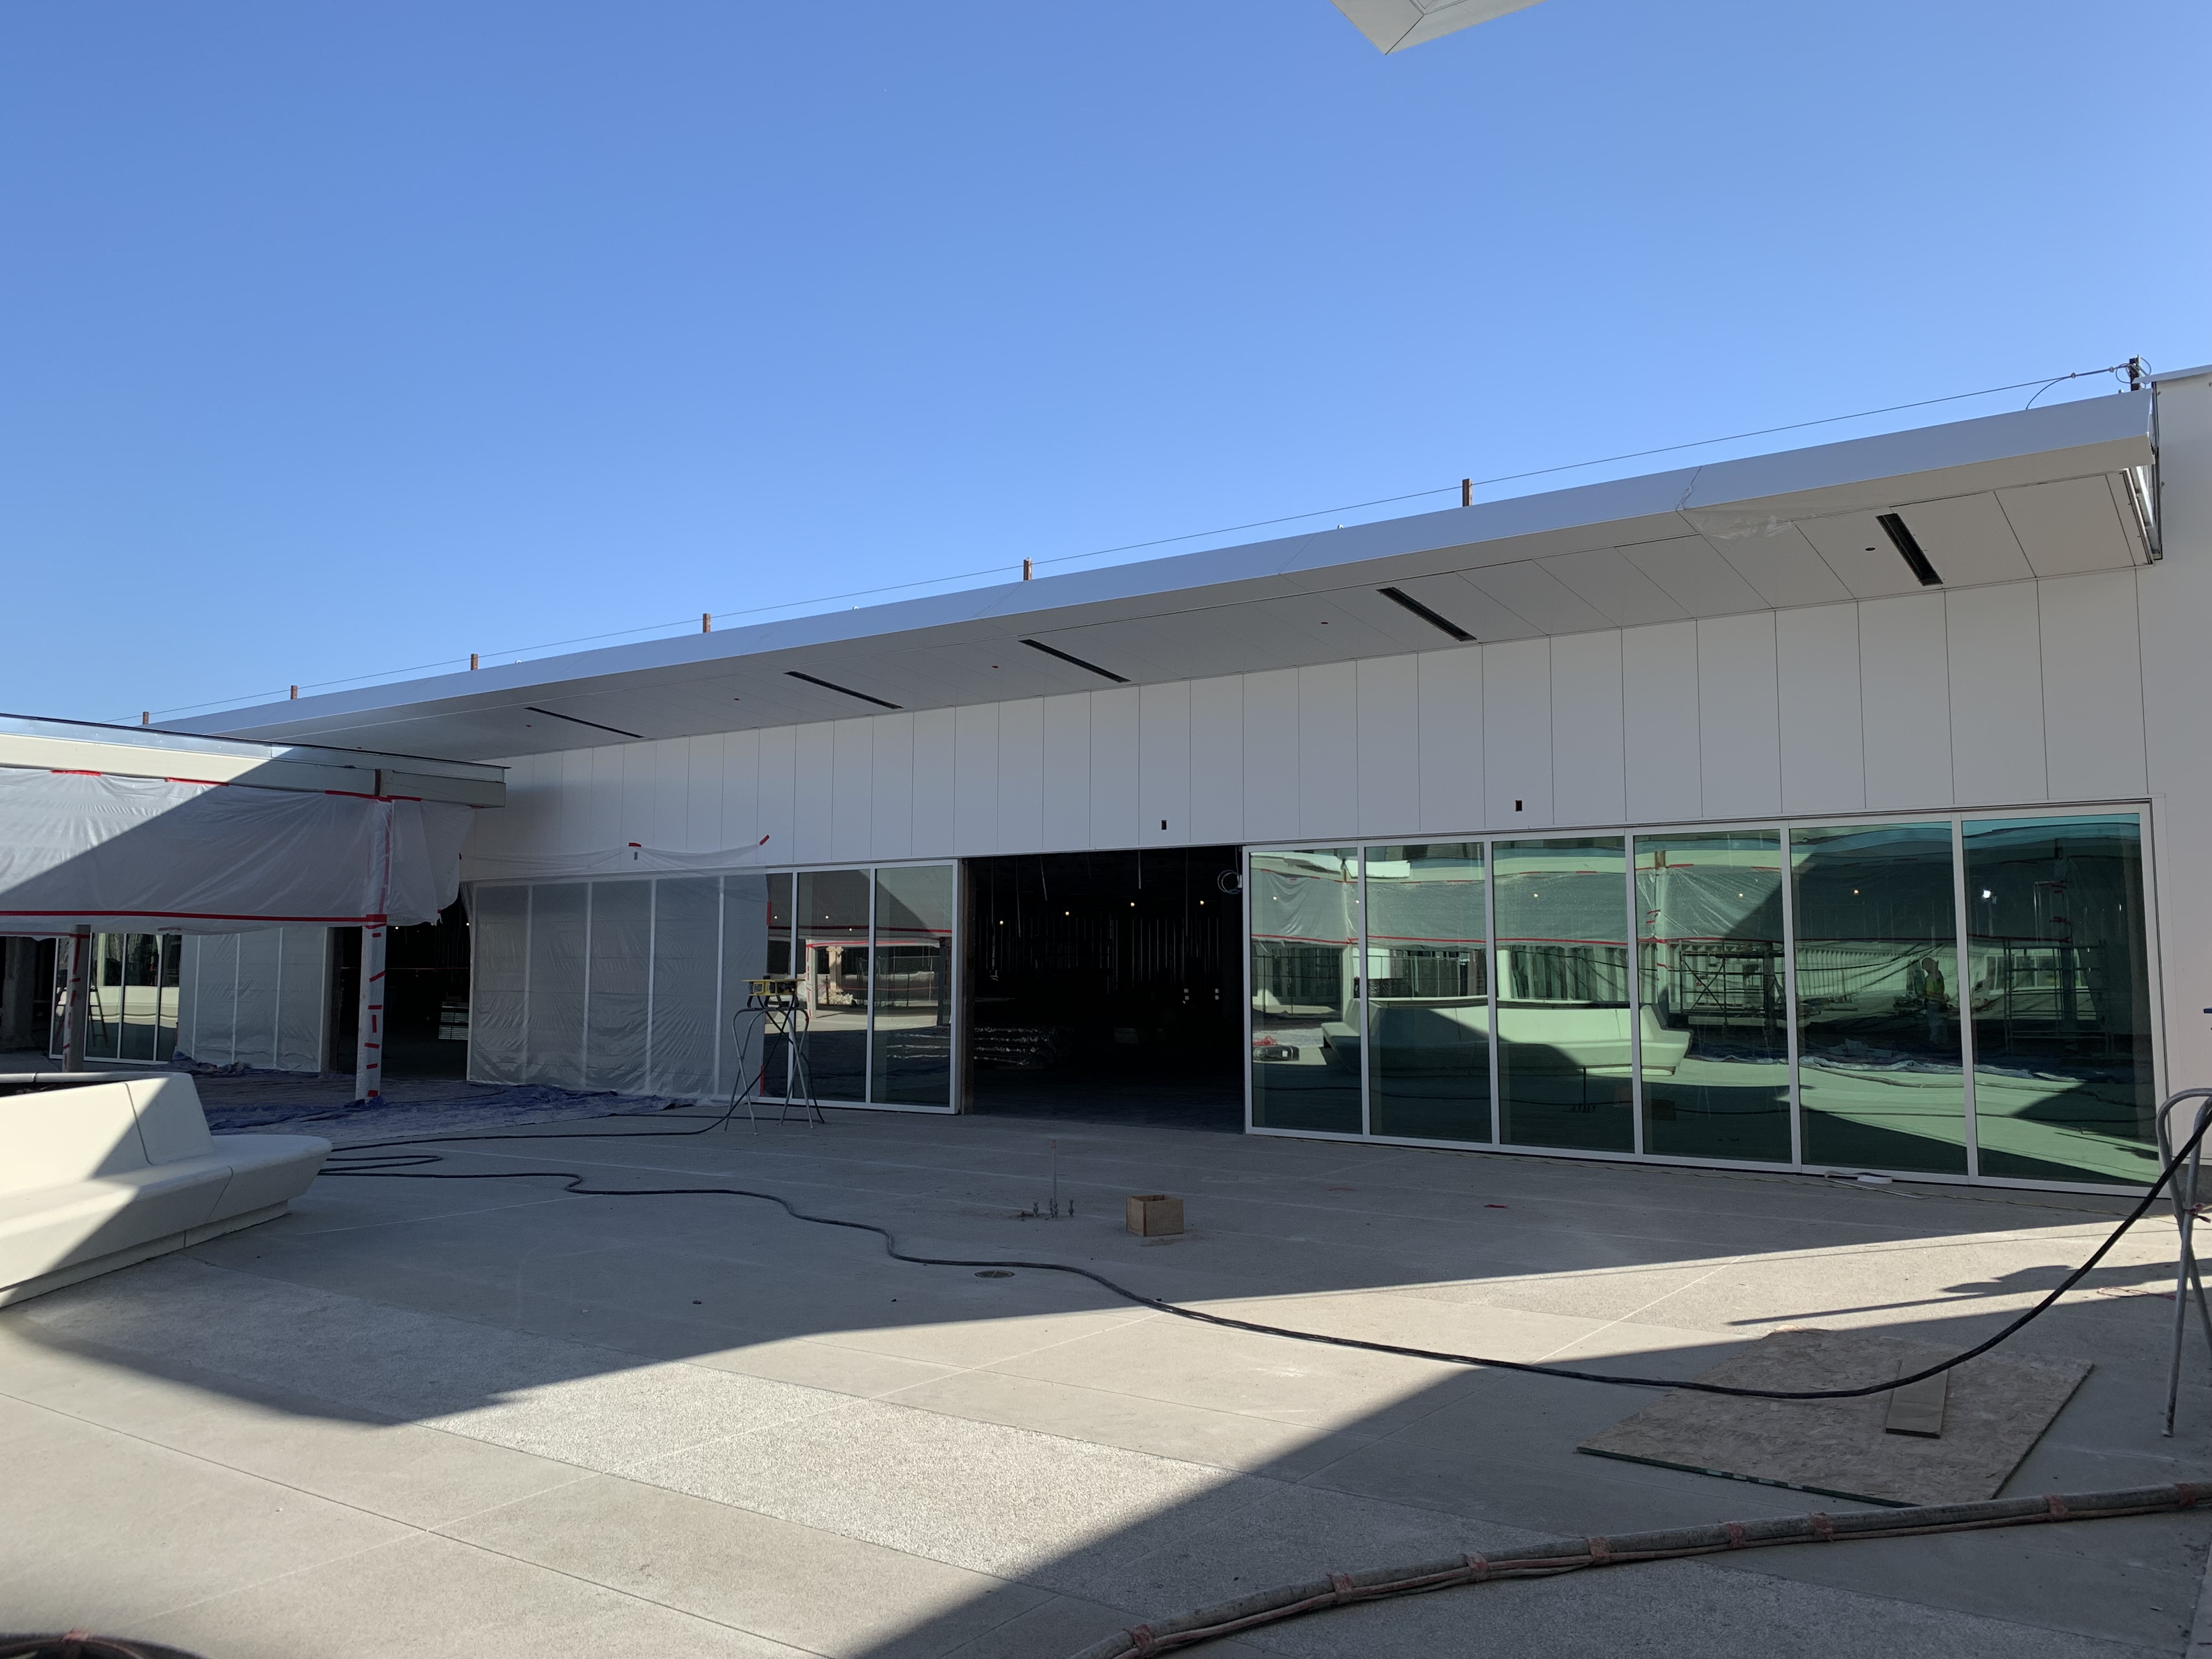 A customer service building on the top level of the Ready Return building at the Consolidated Rent-A-Car facility.